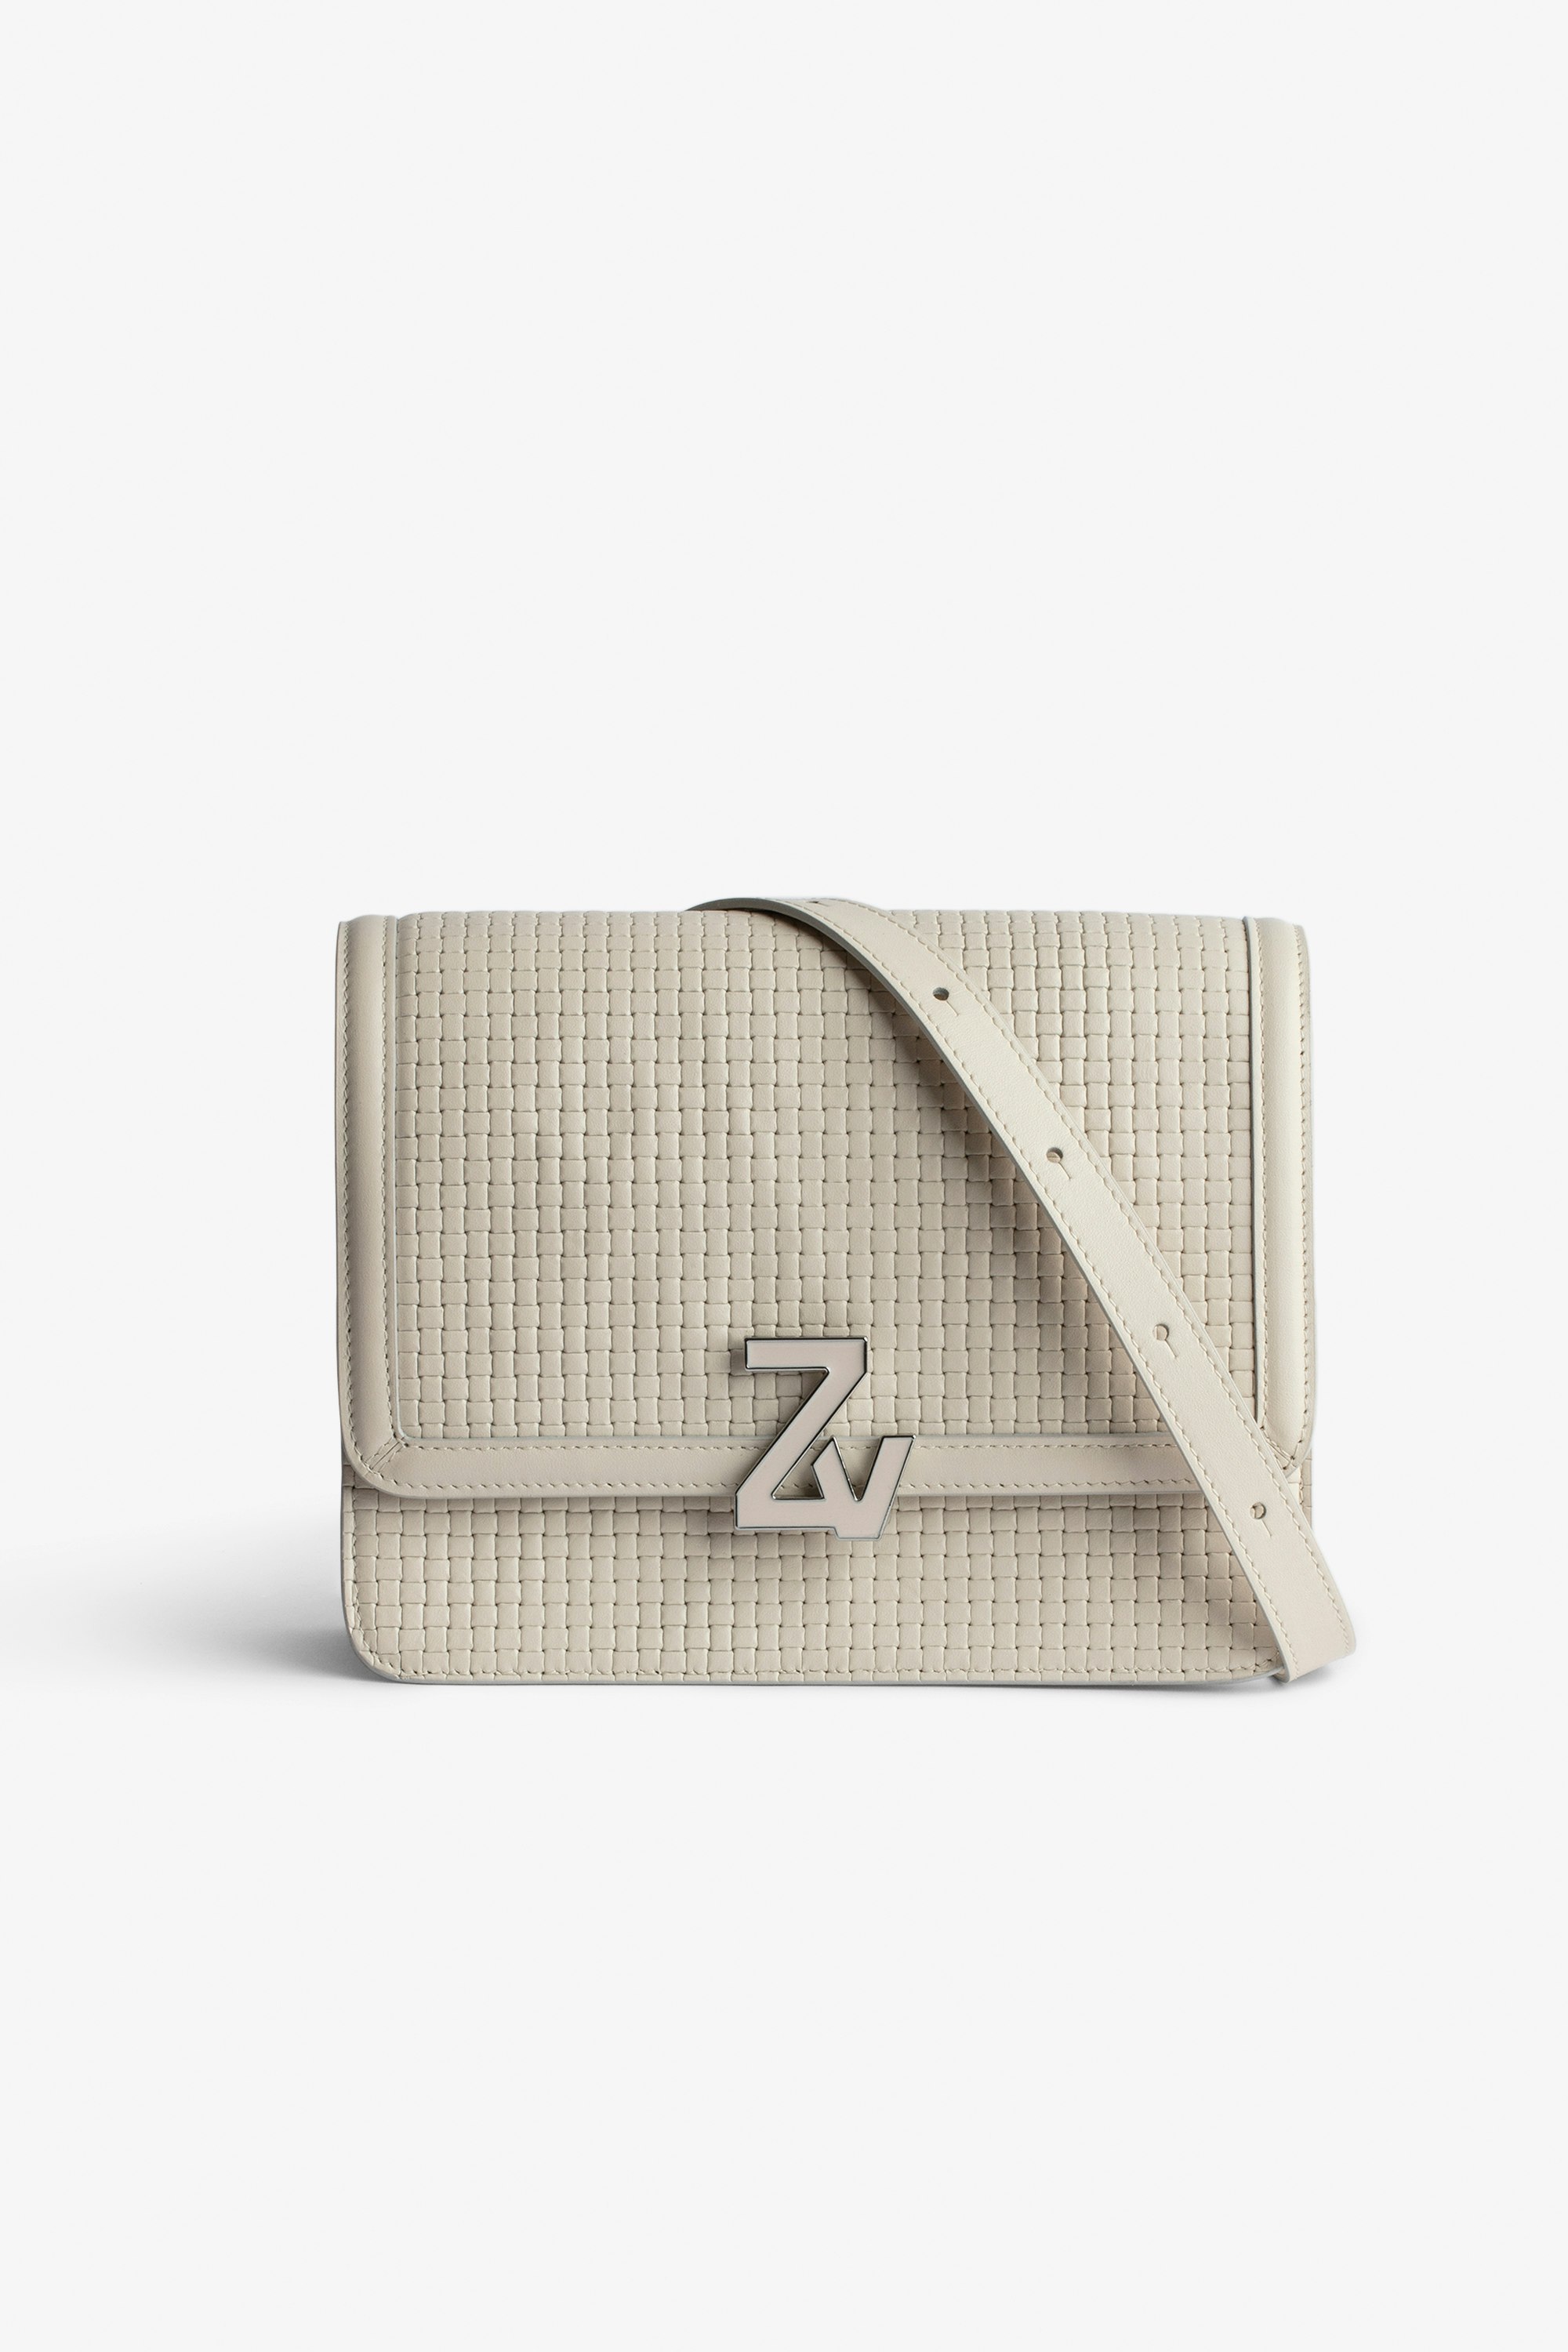 ZV Initiale Le City Bag Women’s bag in ecru latticework leather with a shoulder strap and ZV clasp